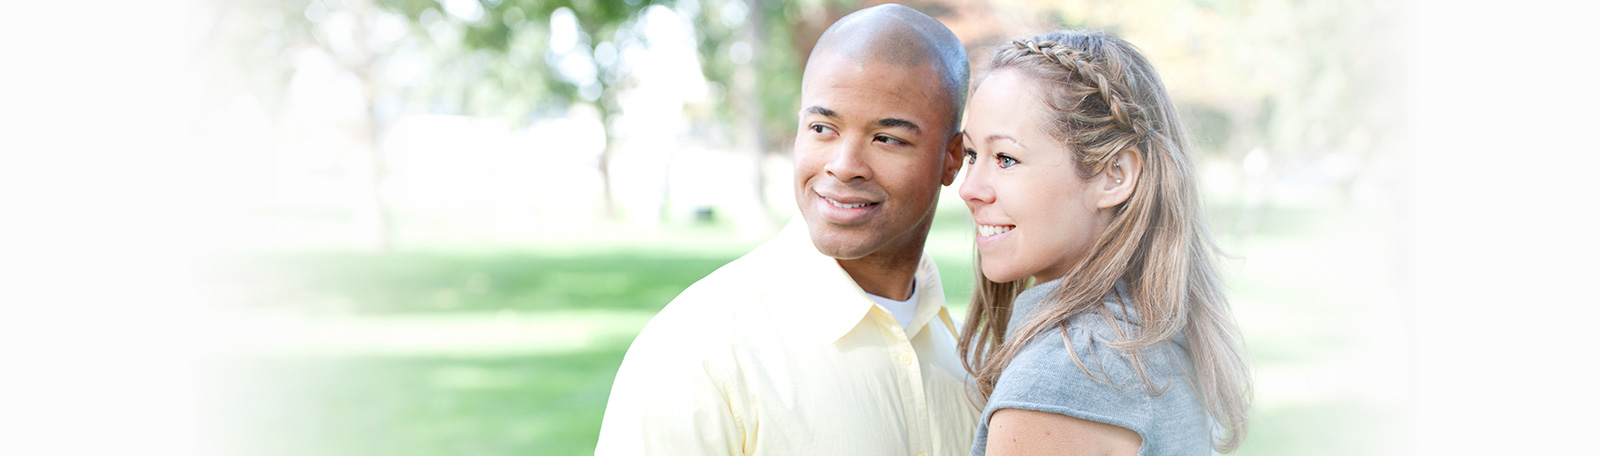 Smiling interracial couple in the park